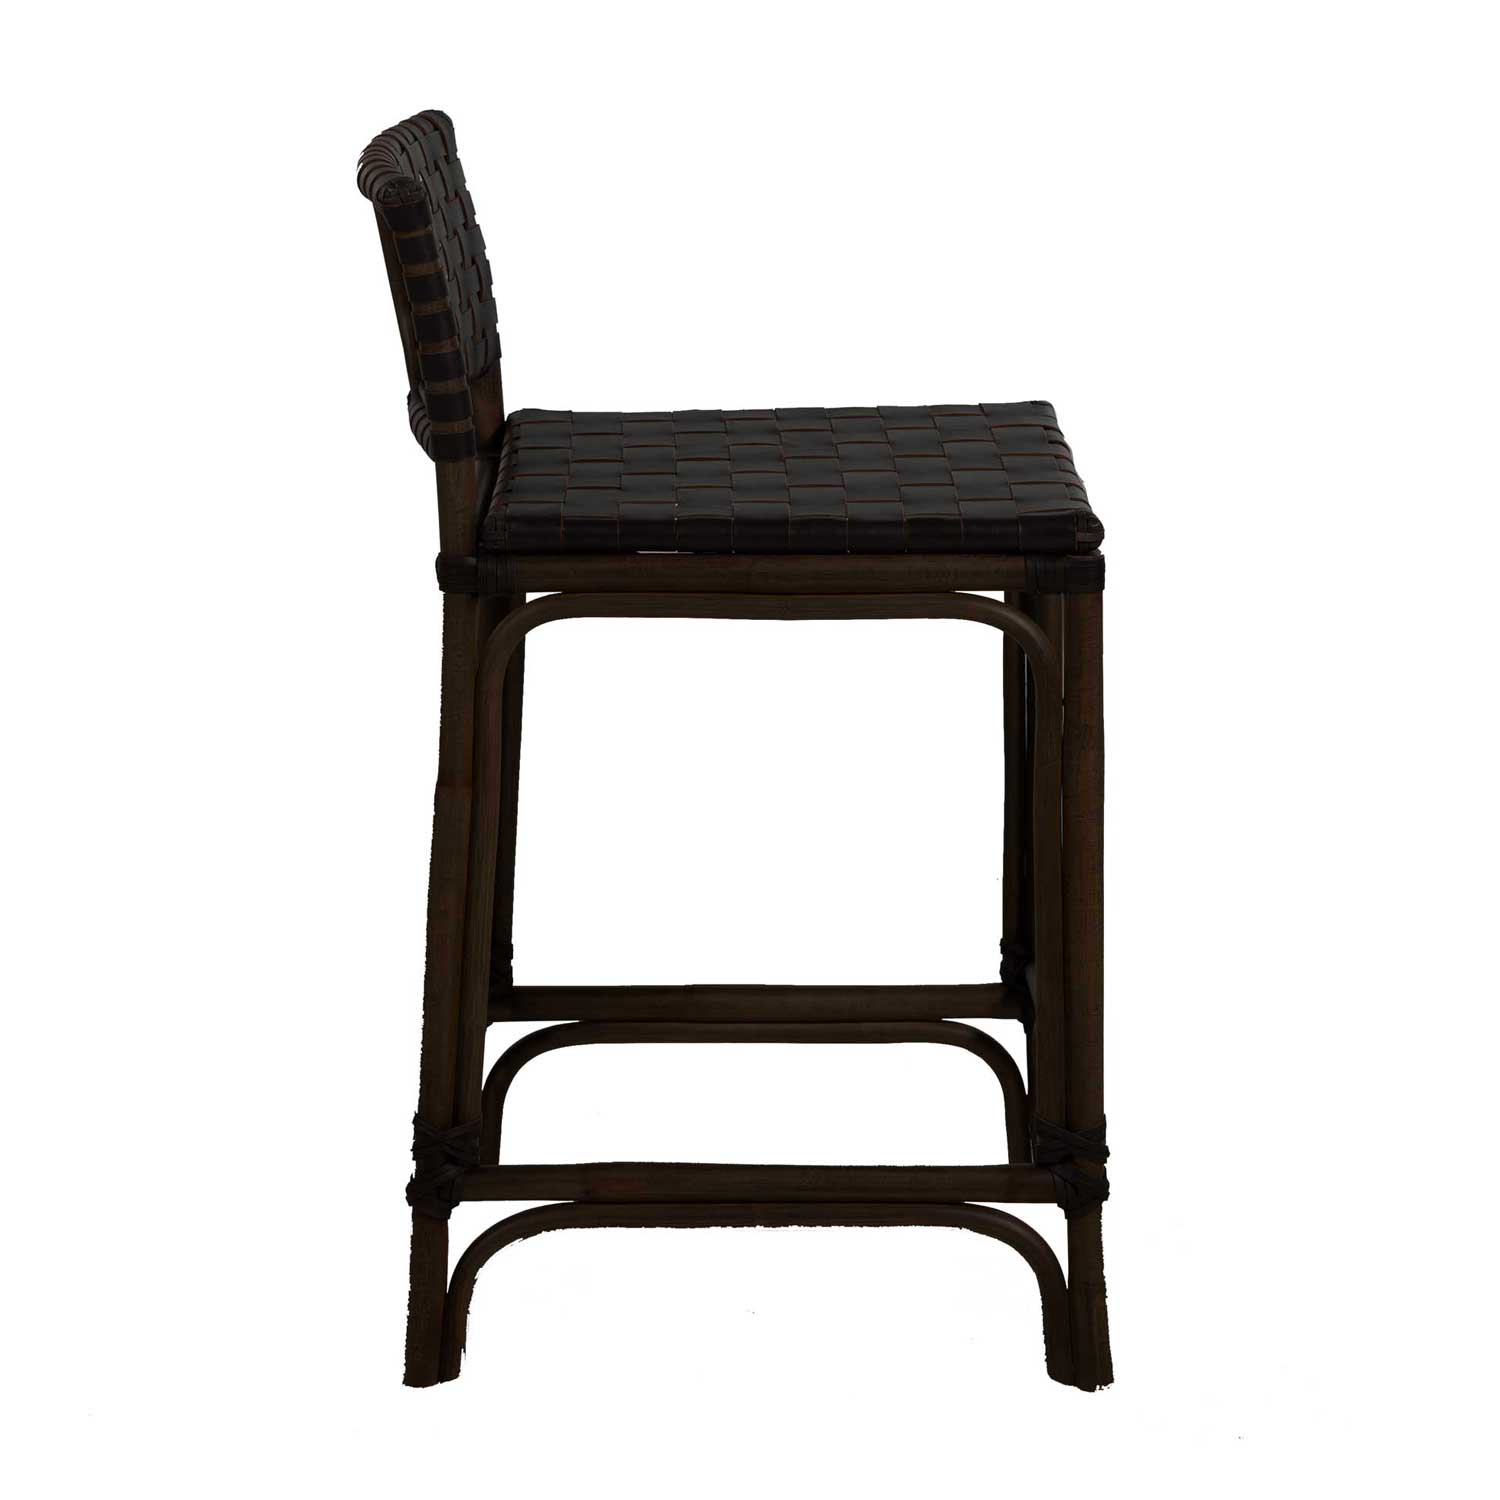 Oliver Counter Stool